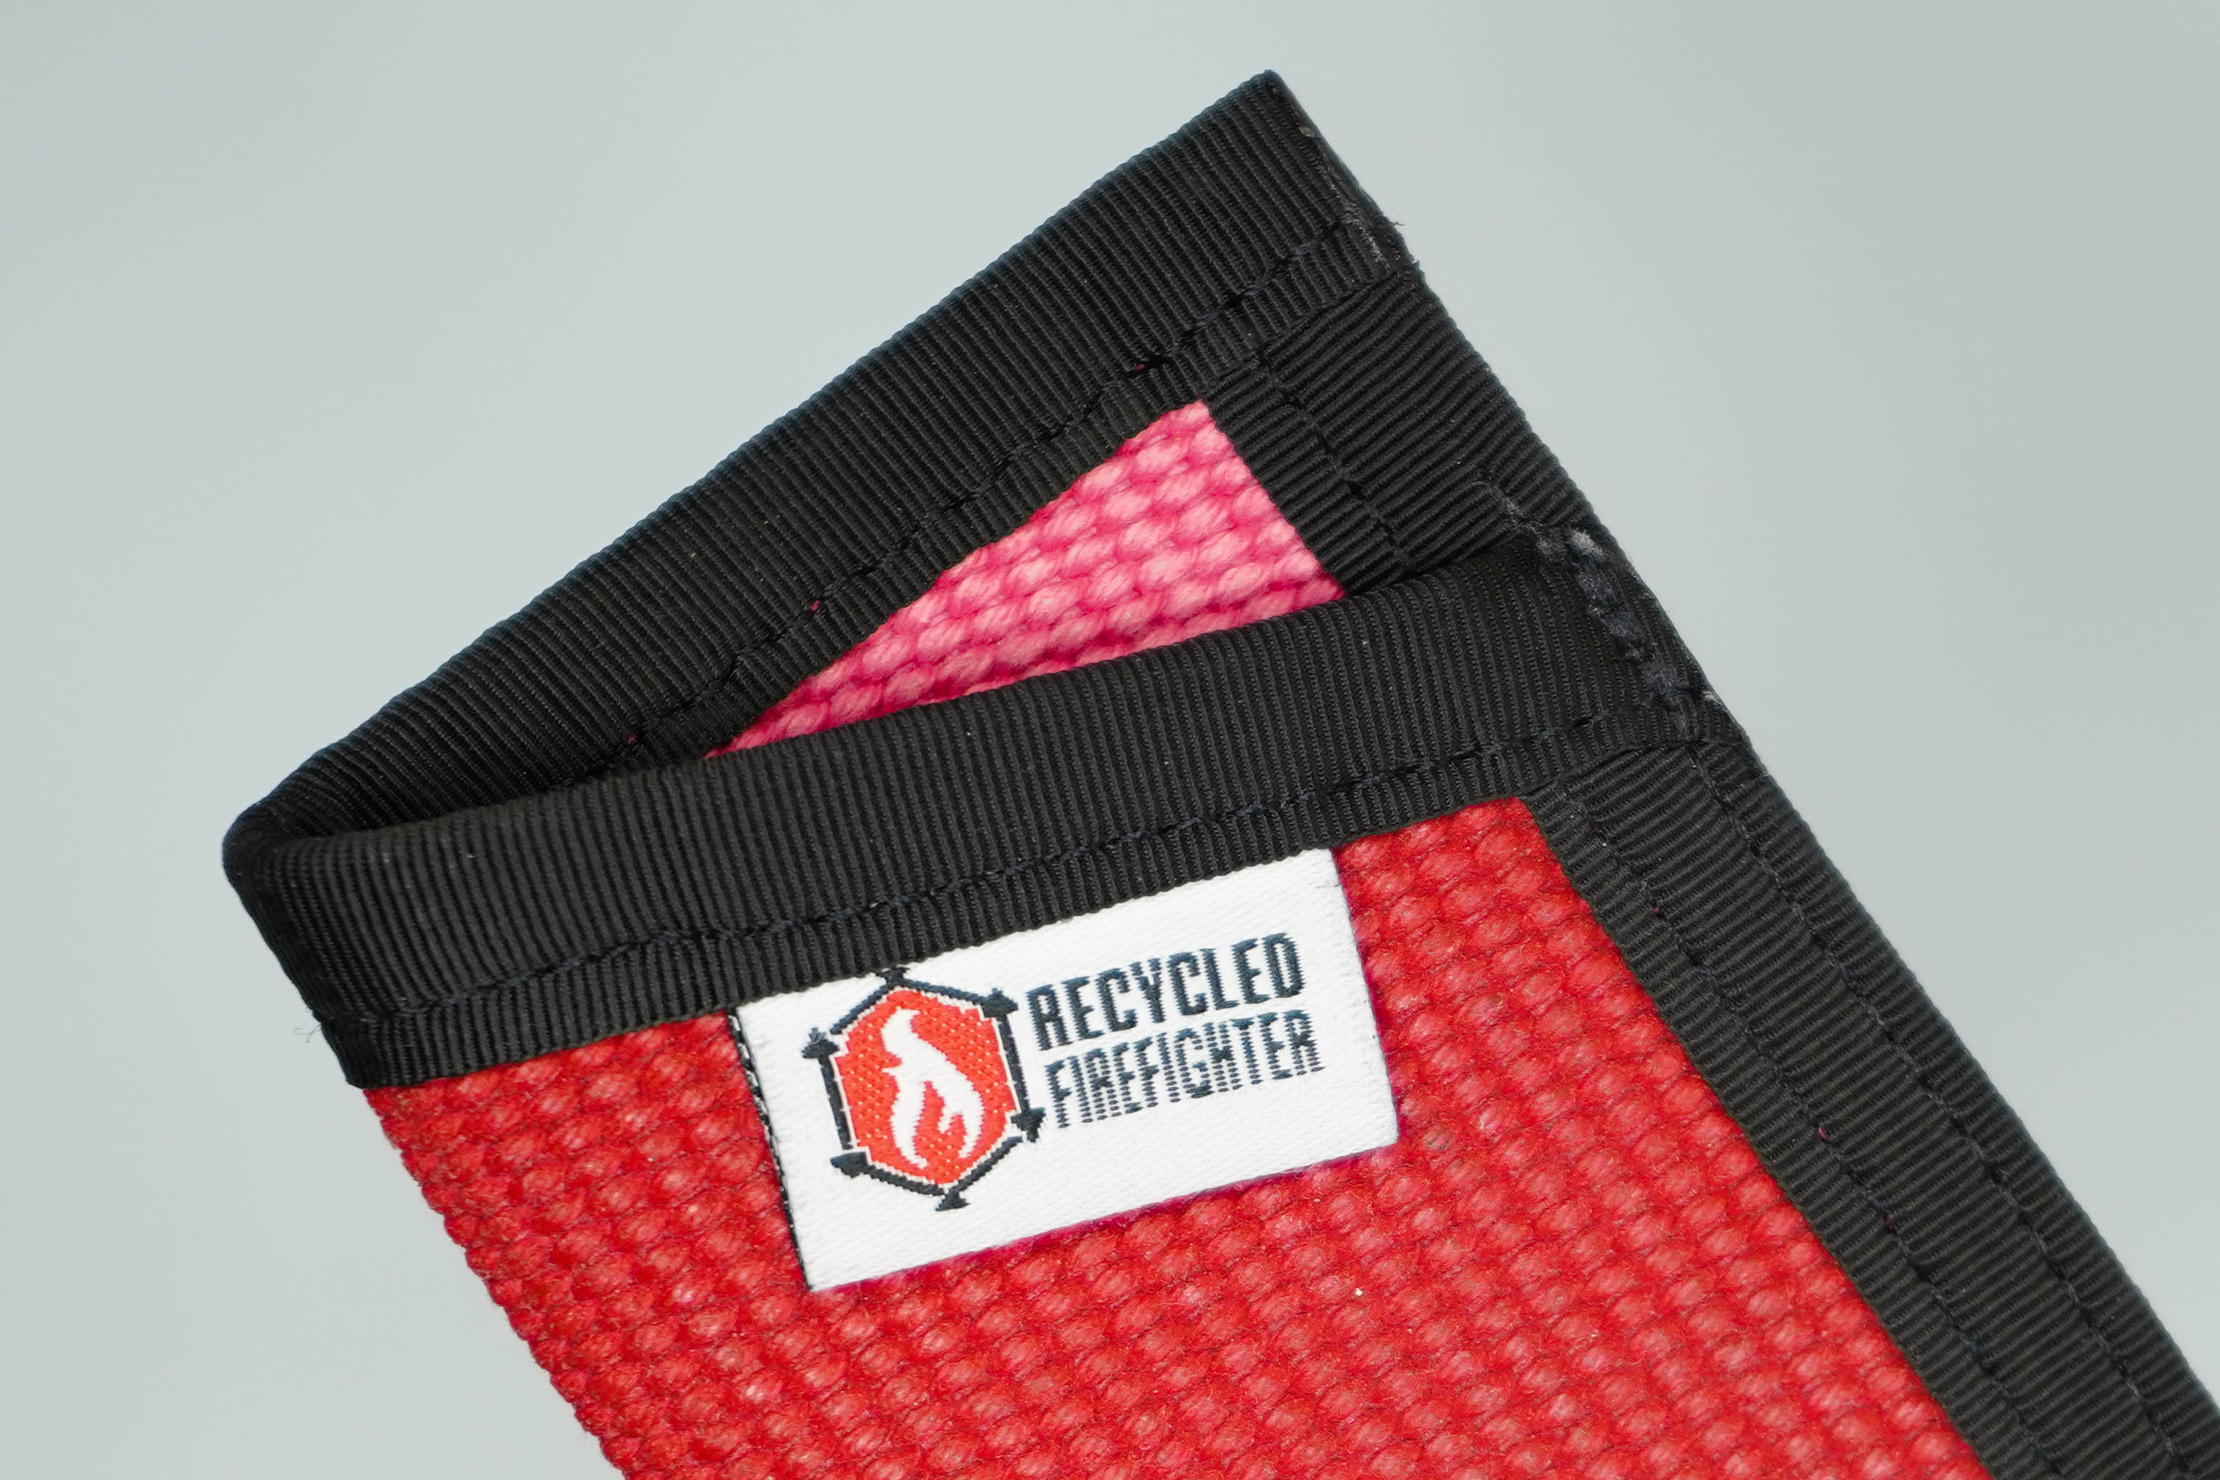 Recycled Firefighter The Fire Hose Sergeant Wallet Logo